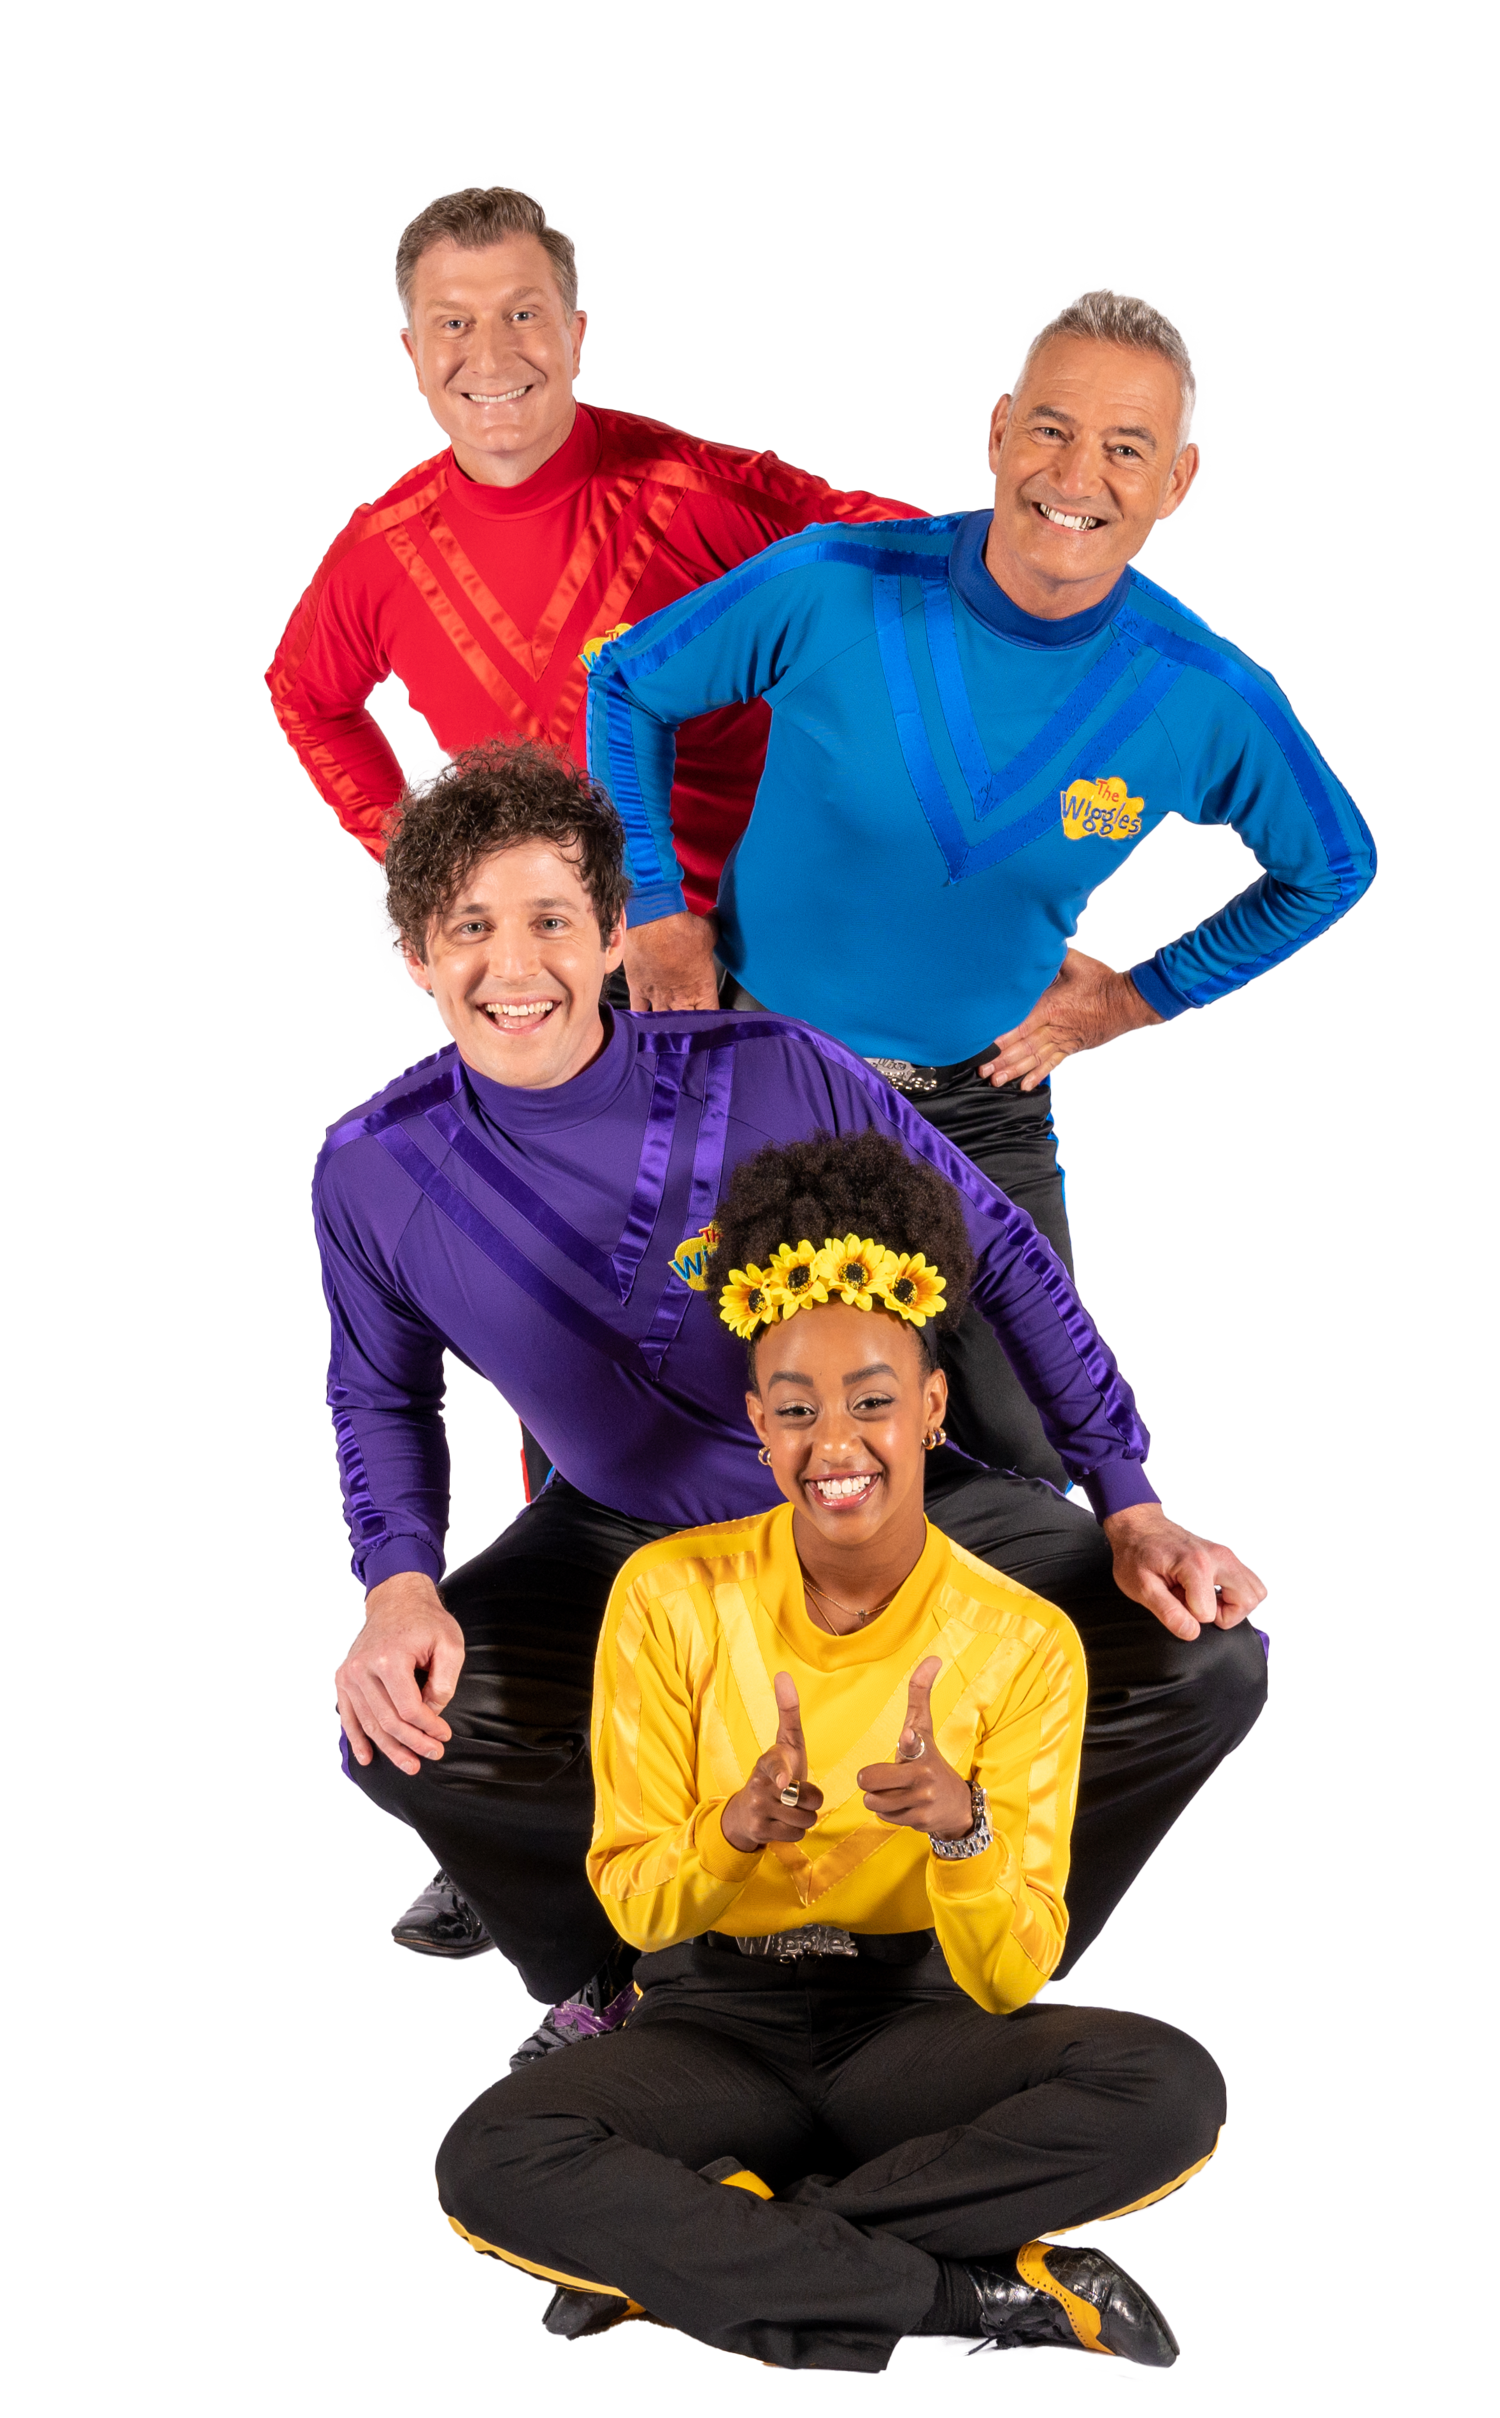 The Wiggles going 'woke' is a win-win: more role models for us, a bigger  market for them, Children's TV